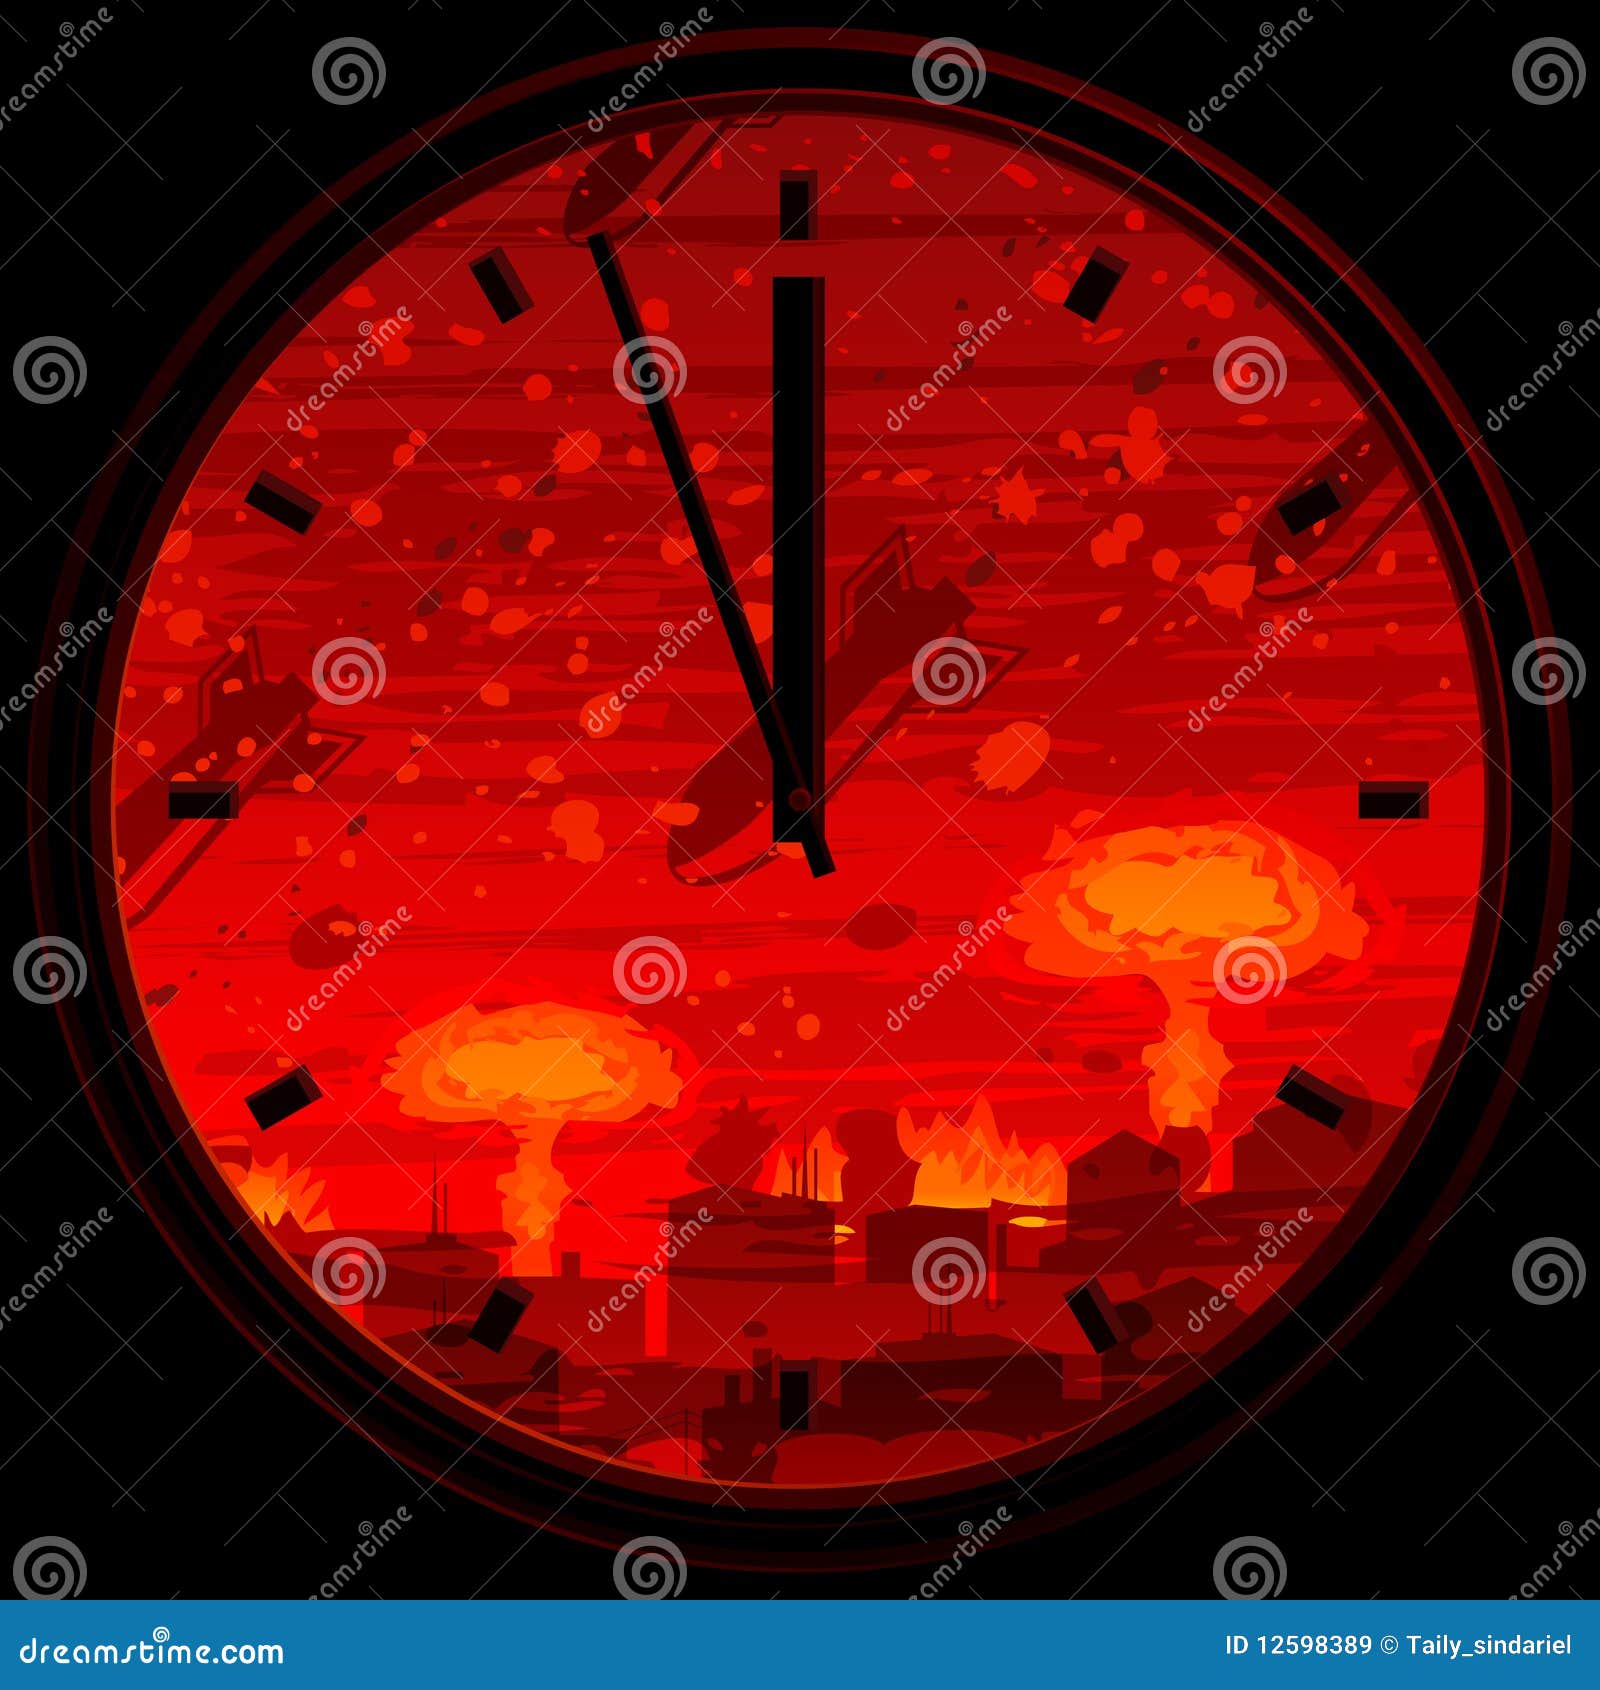 Doomsday Clock Royalty Free Stock Images - Image: 125983891300 x 1390